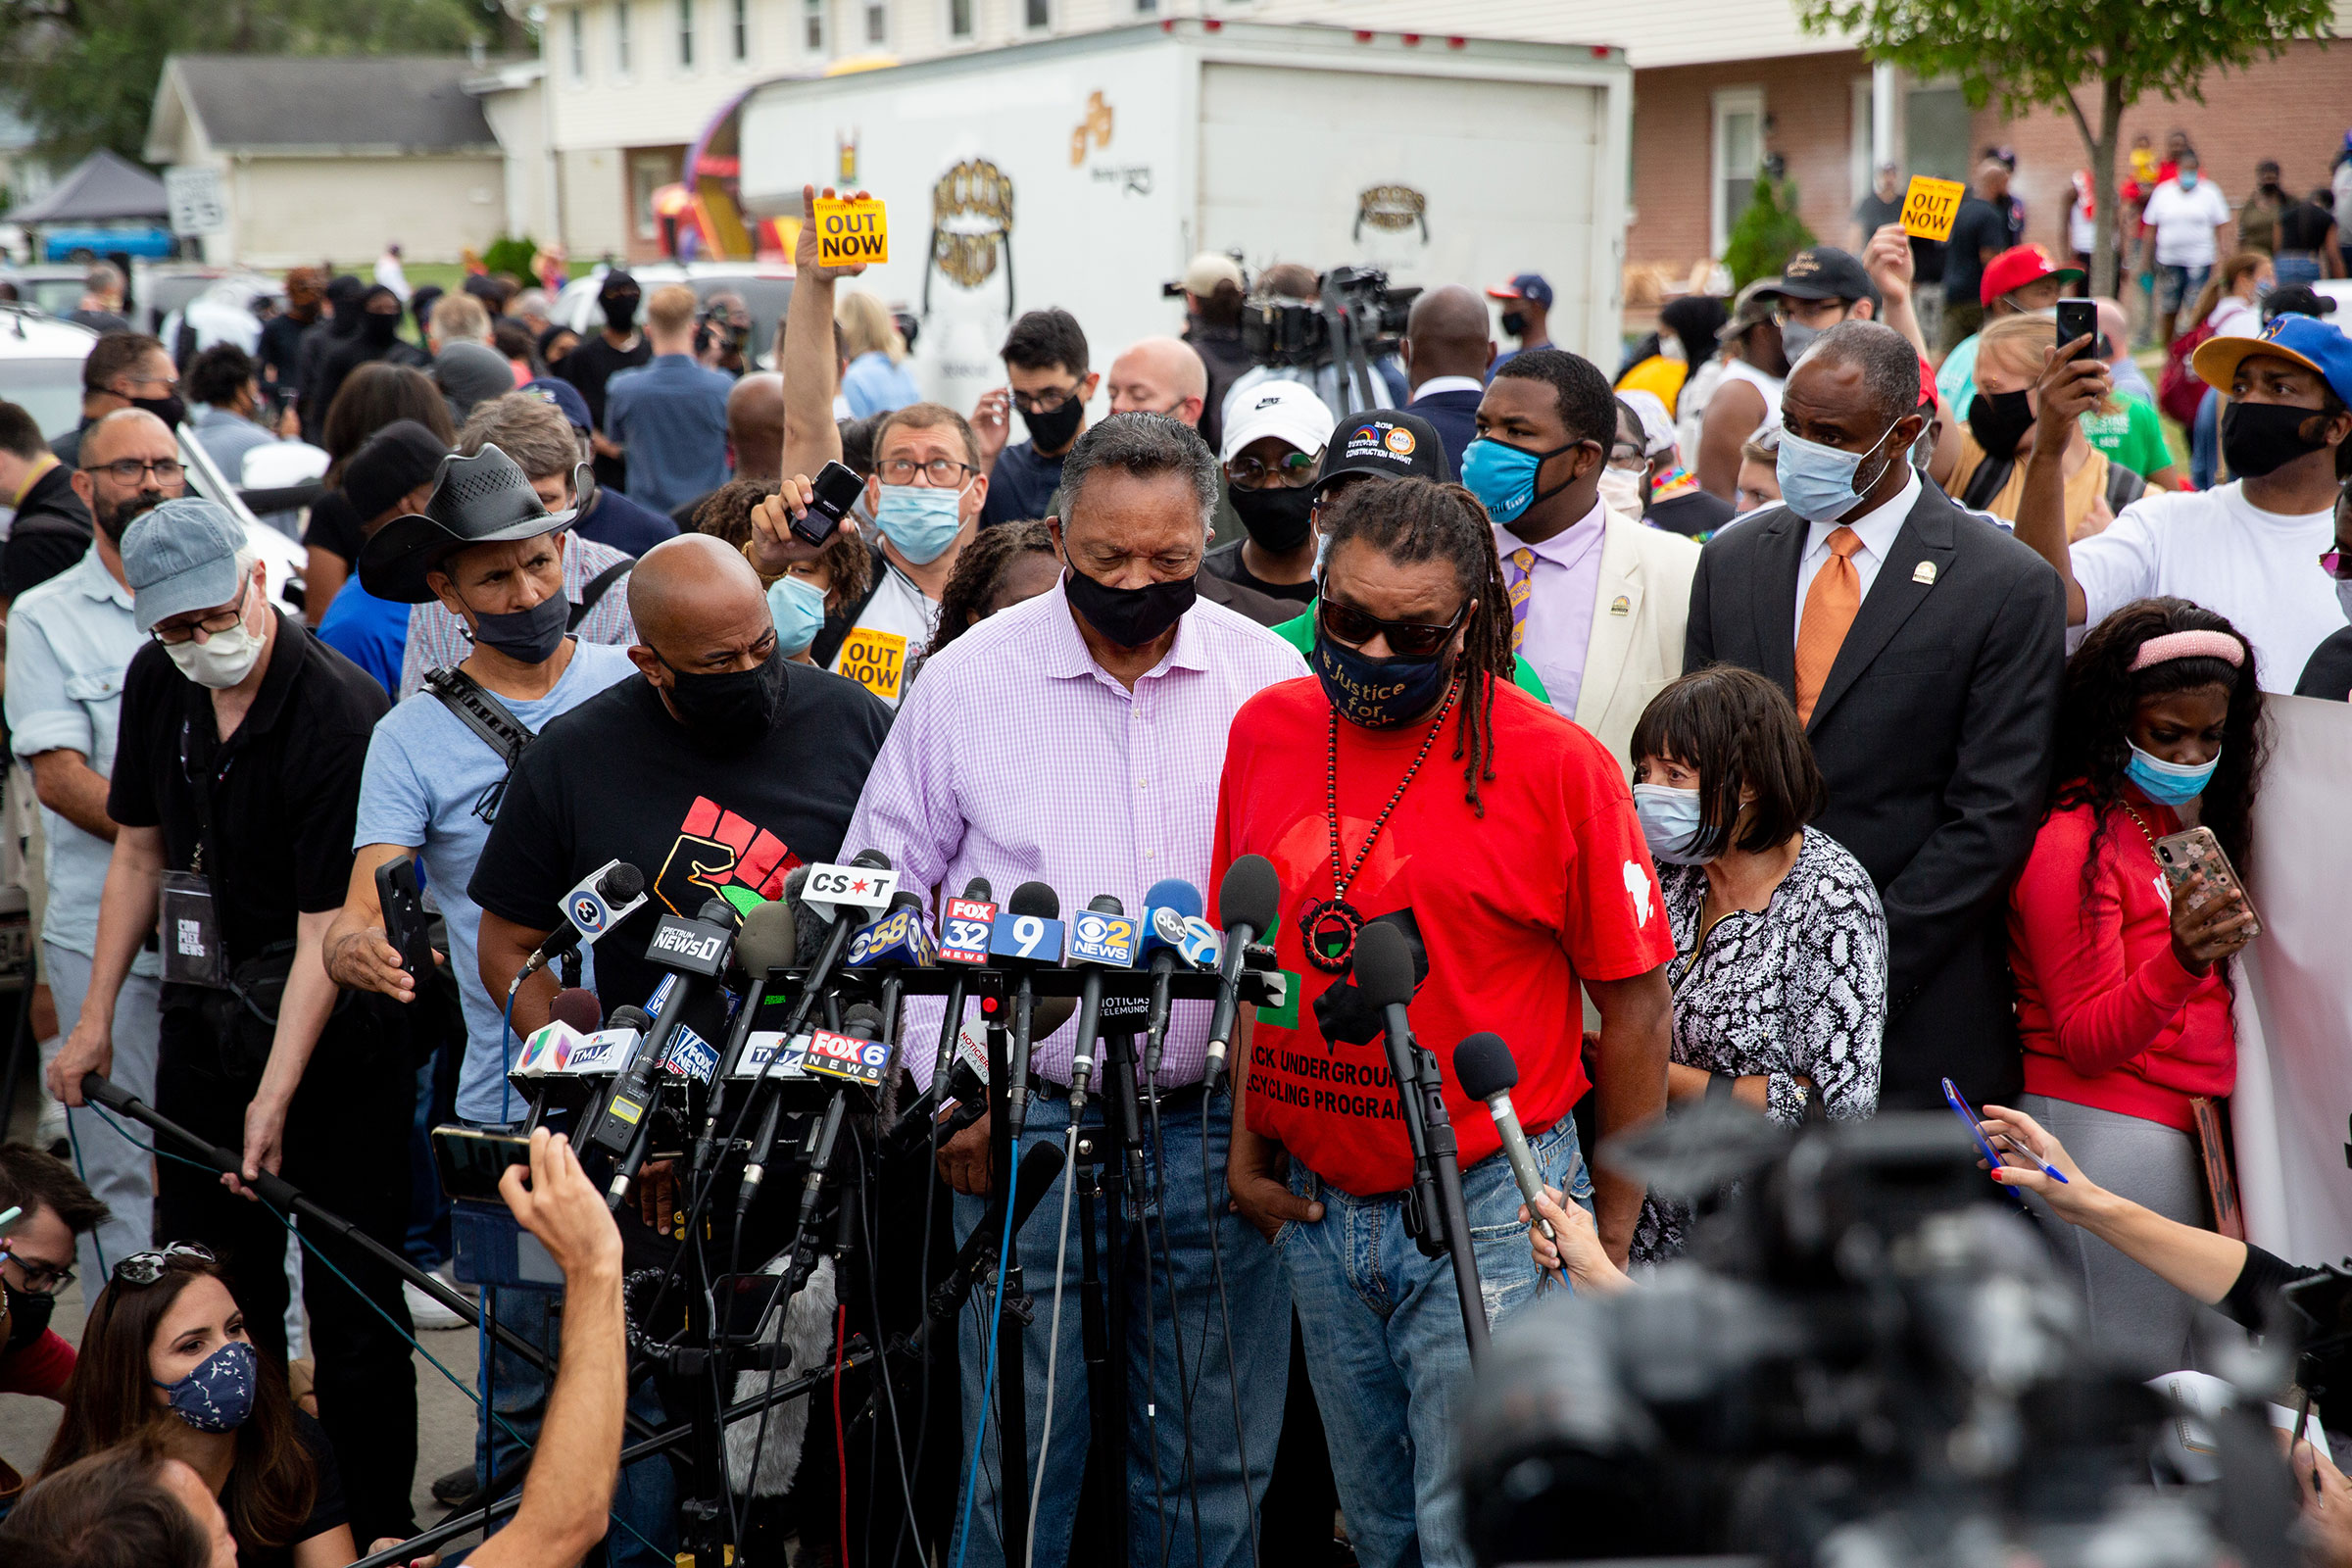 The Rev. Jesse Jackson speaks as he and Justin Blake, uncle of Jacob Blake, meet with reporters near the site where Jacob Blake was shot by police in Kenosha, Wis., on Tuesday Sept. 1, 2020. (Patience Zalanga for TIME)